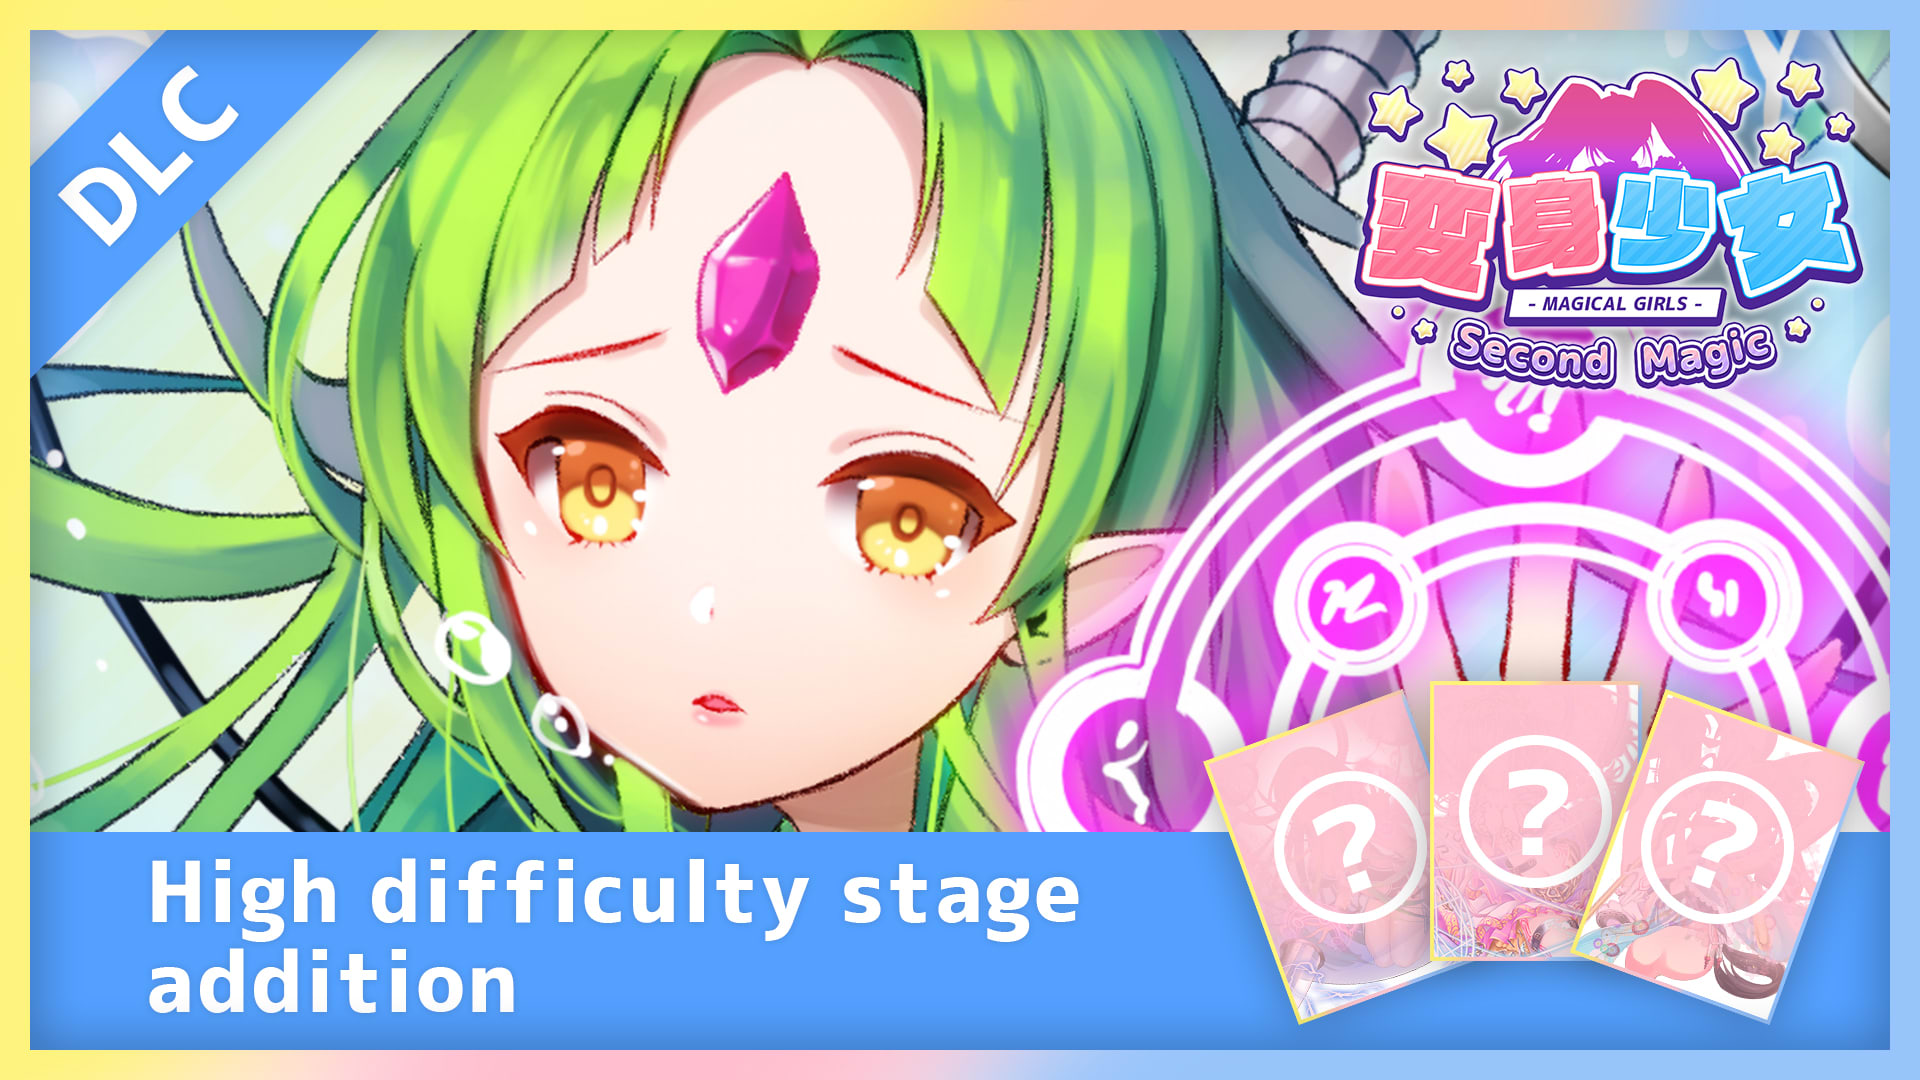 High difficulty stage addition